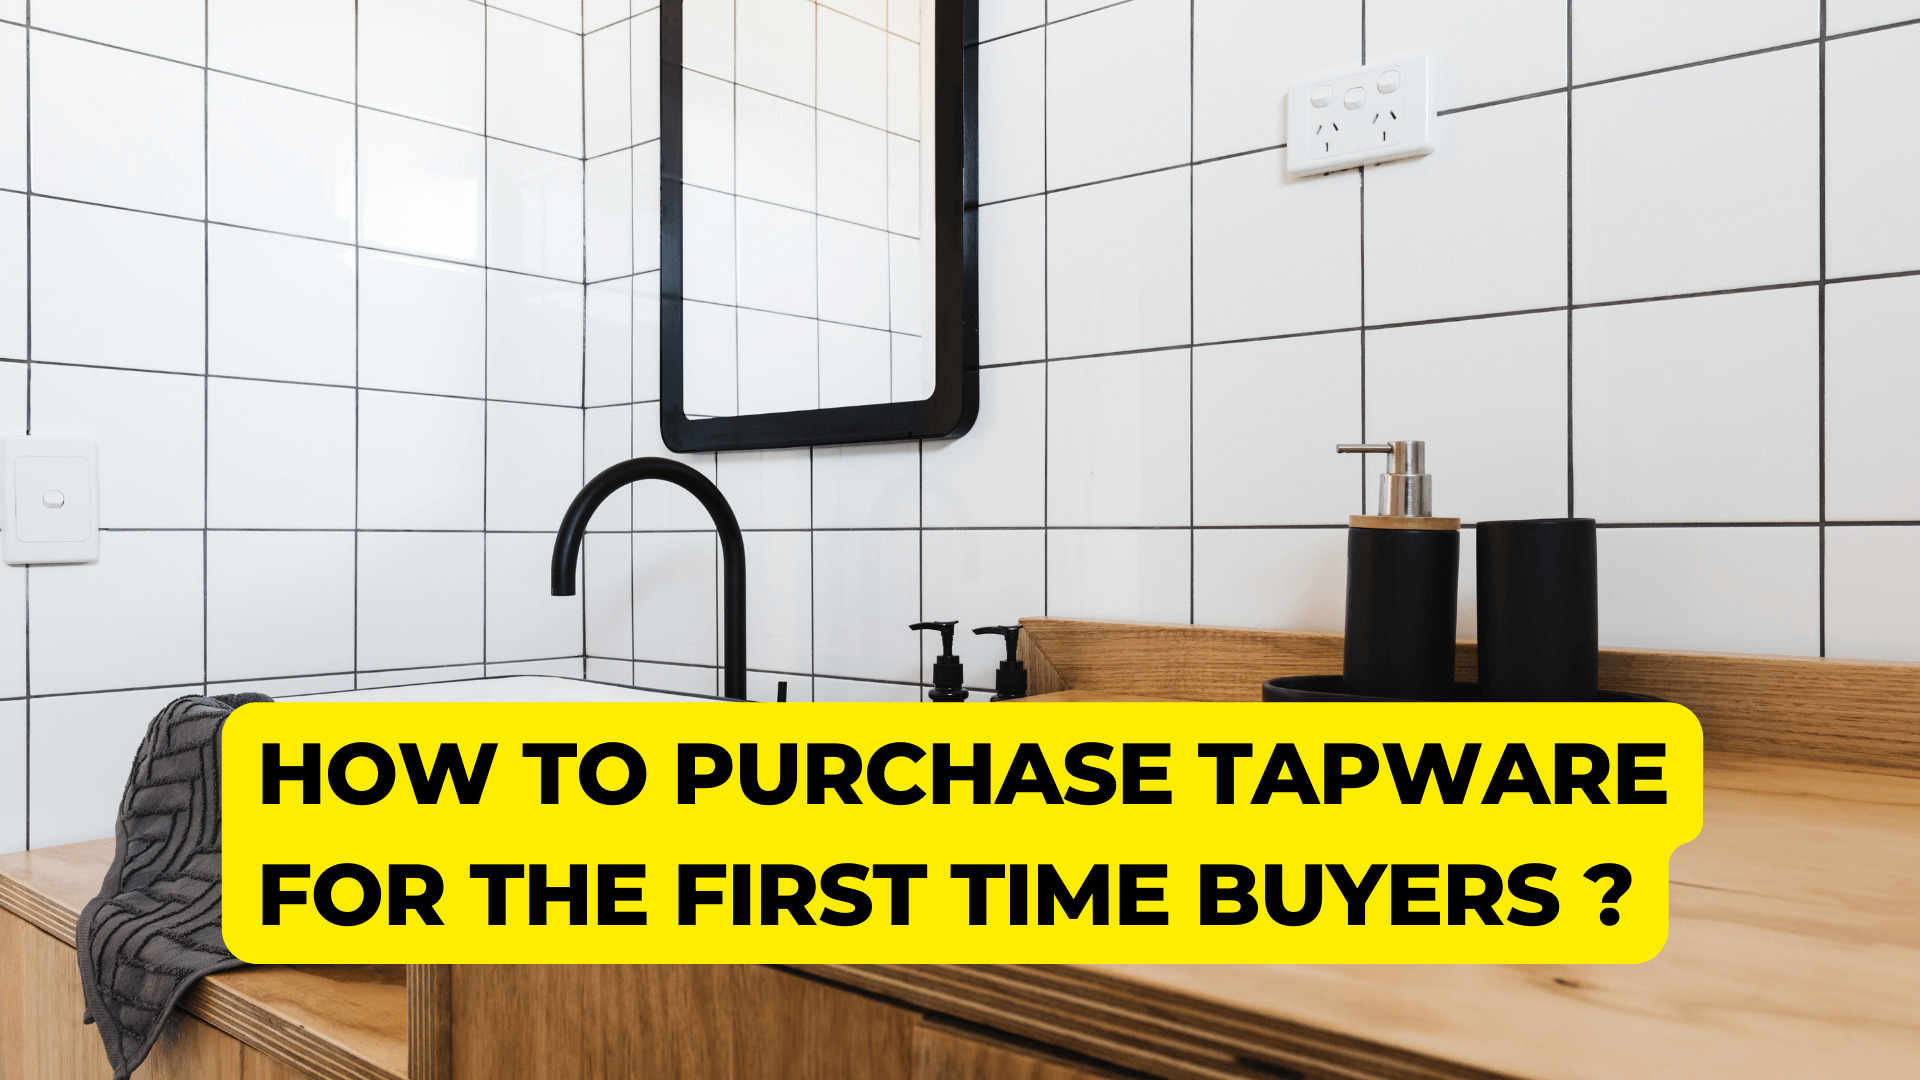 Guide To purchase tapware for the first-time buyers